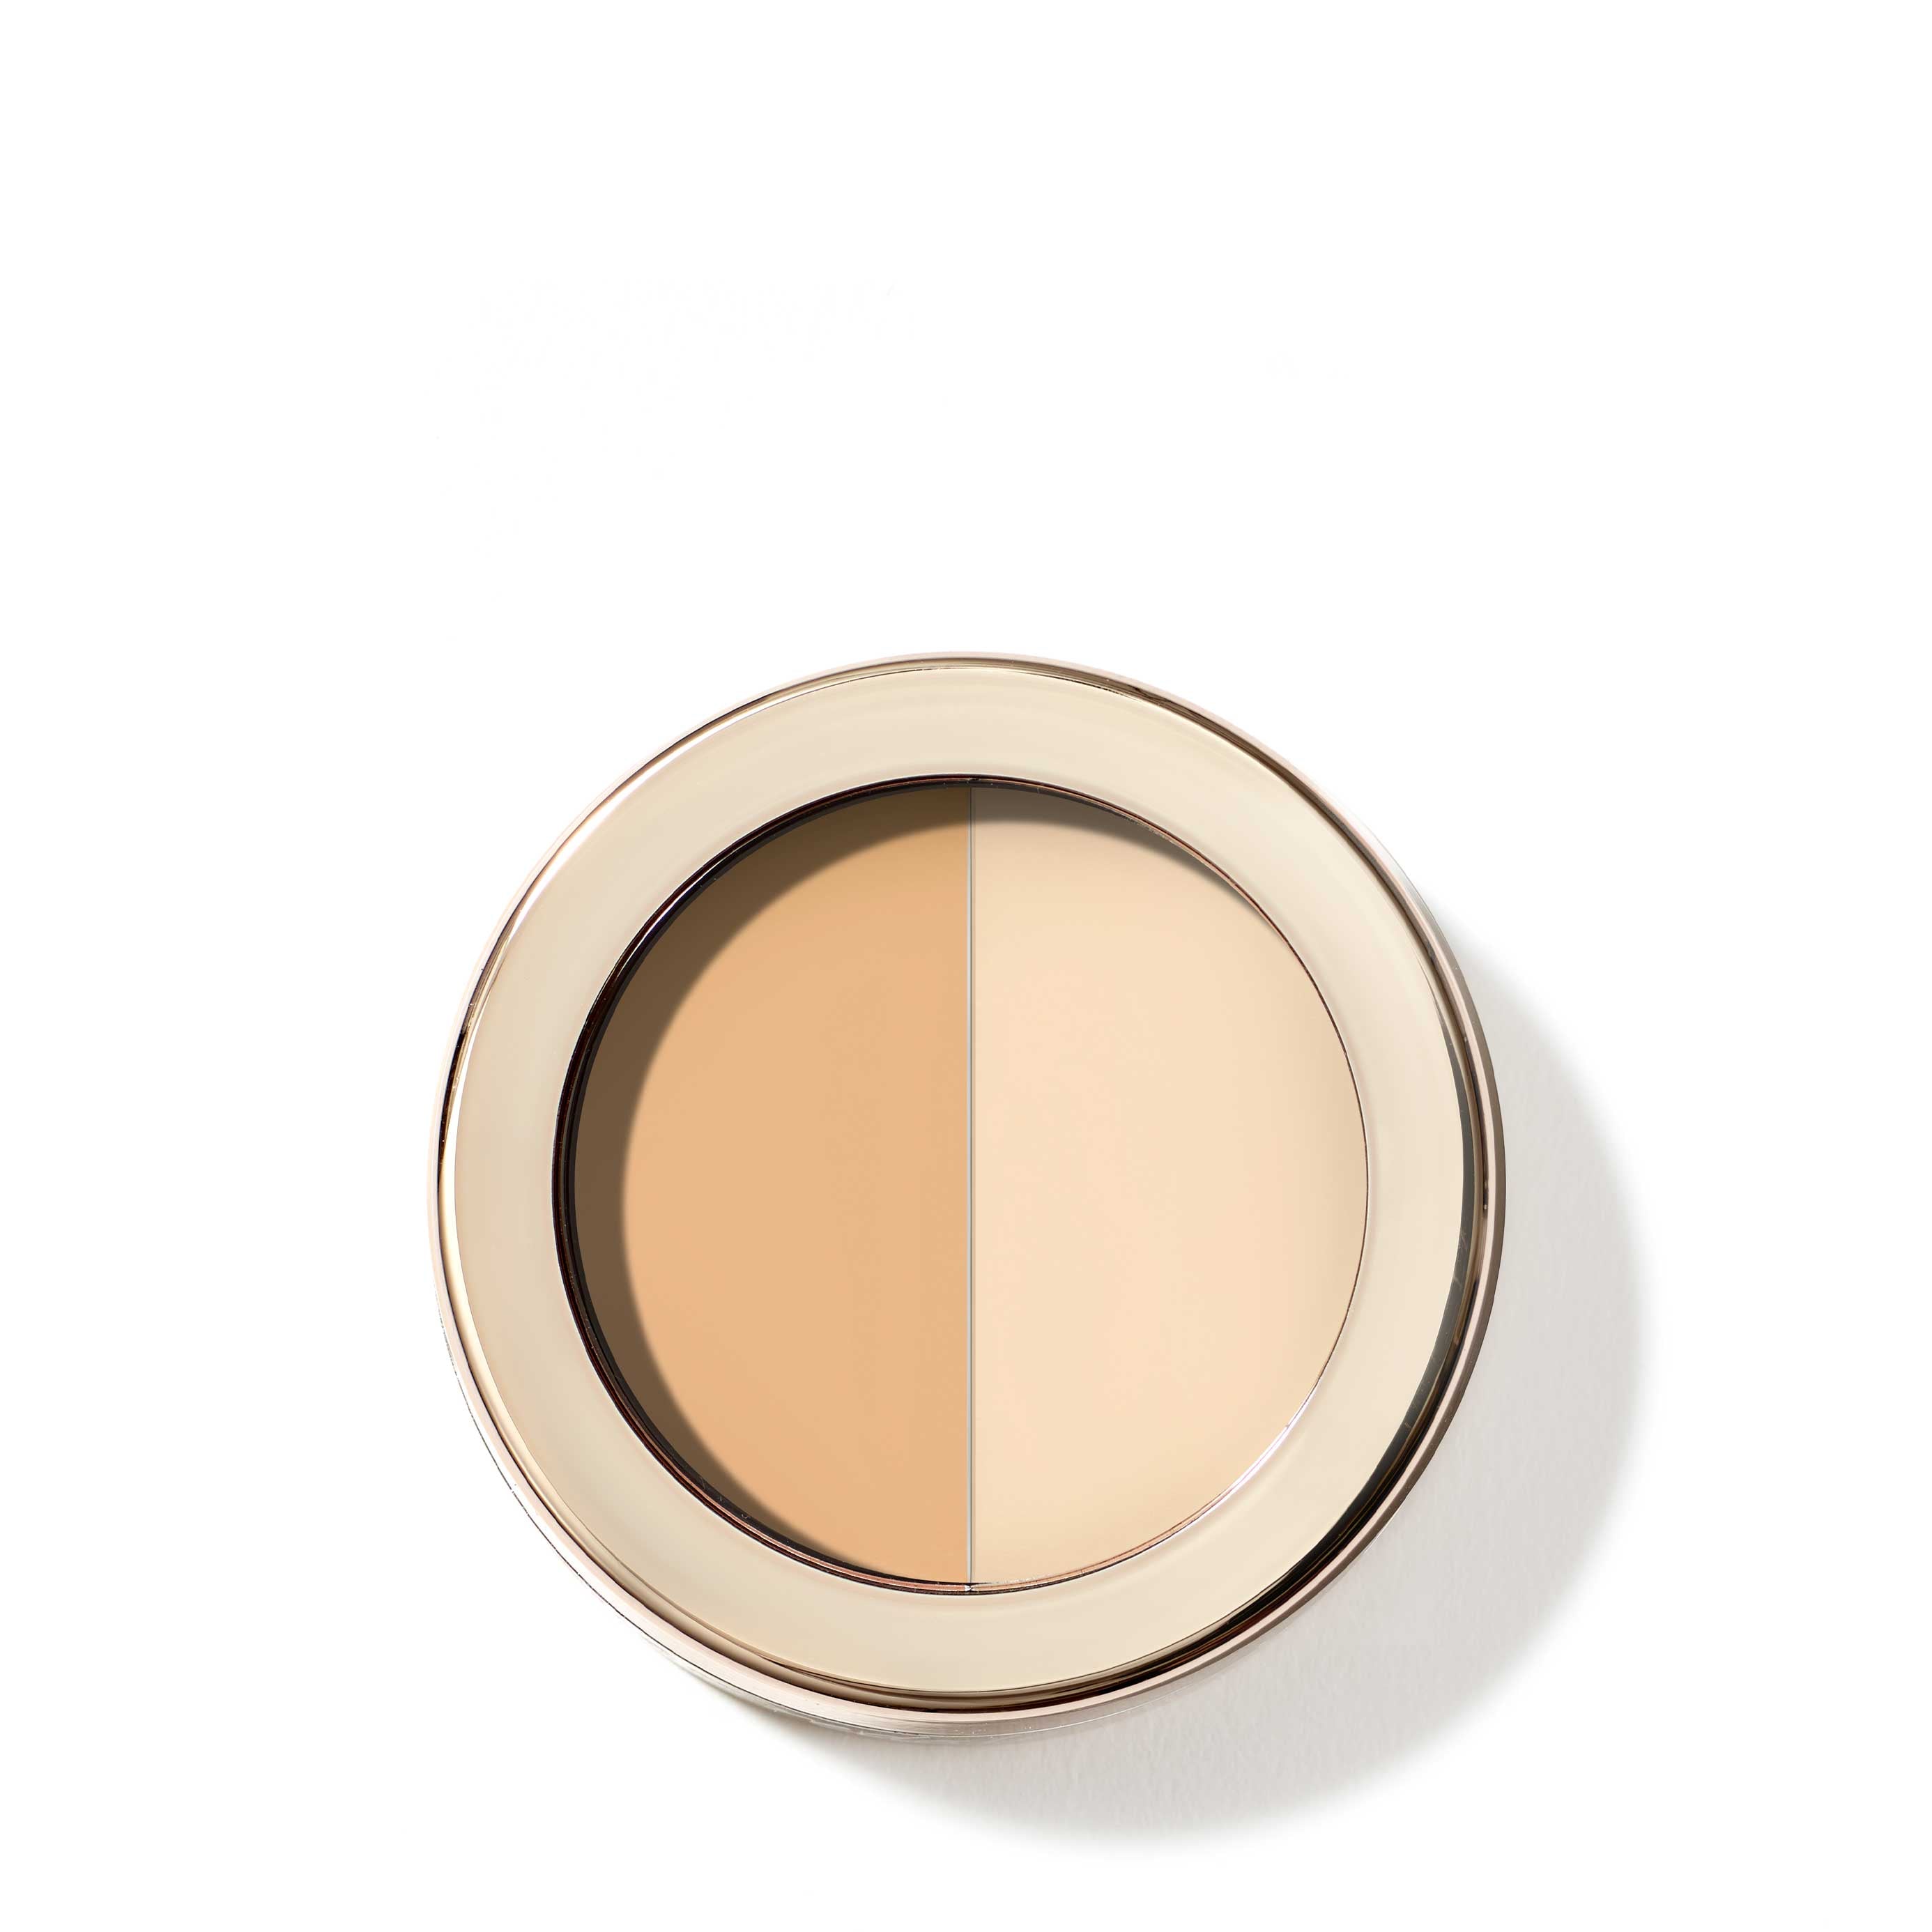 Jane Iredale Circle Delete Under Eye Concealer, #1 yellow - 0.1 oz compact